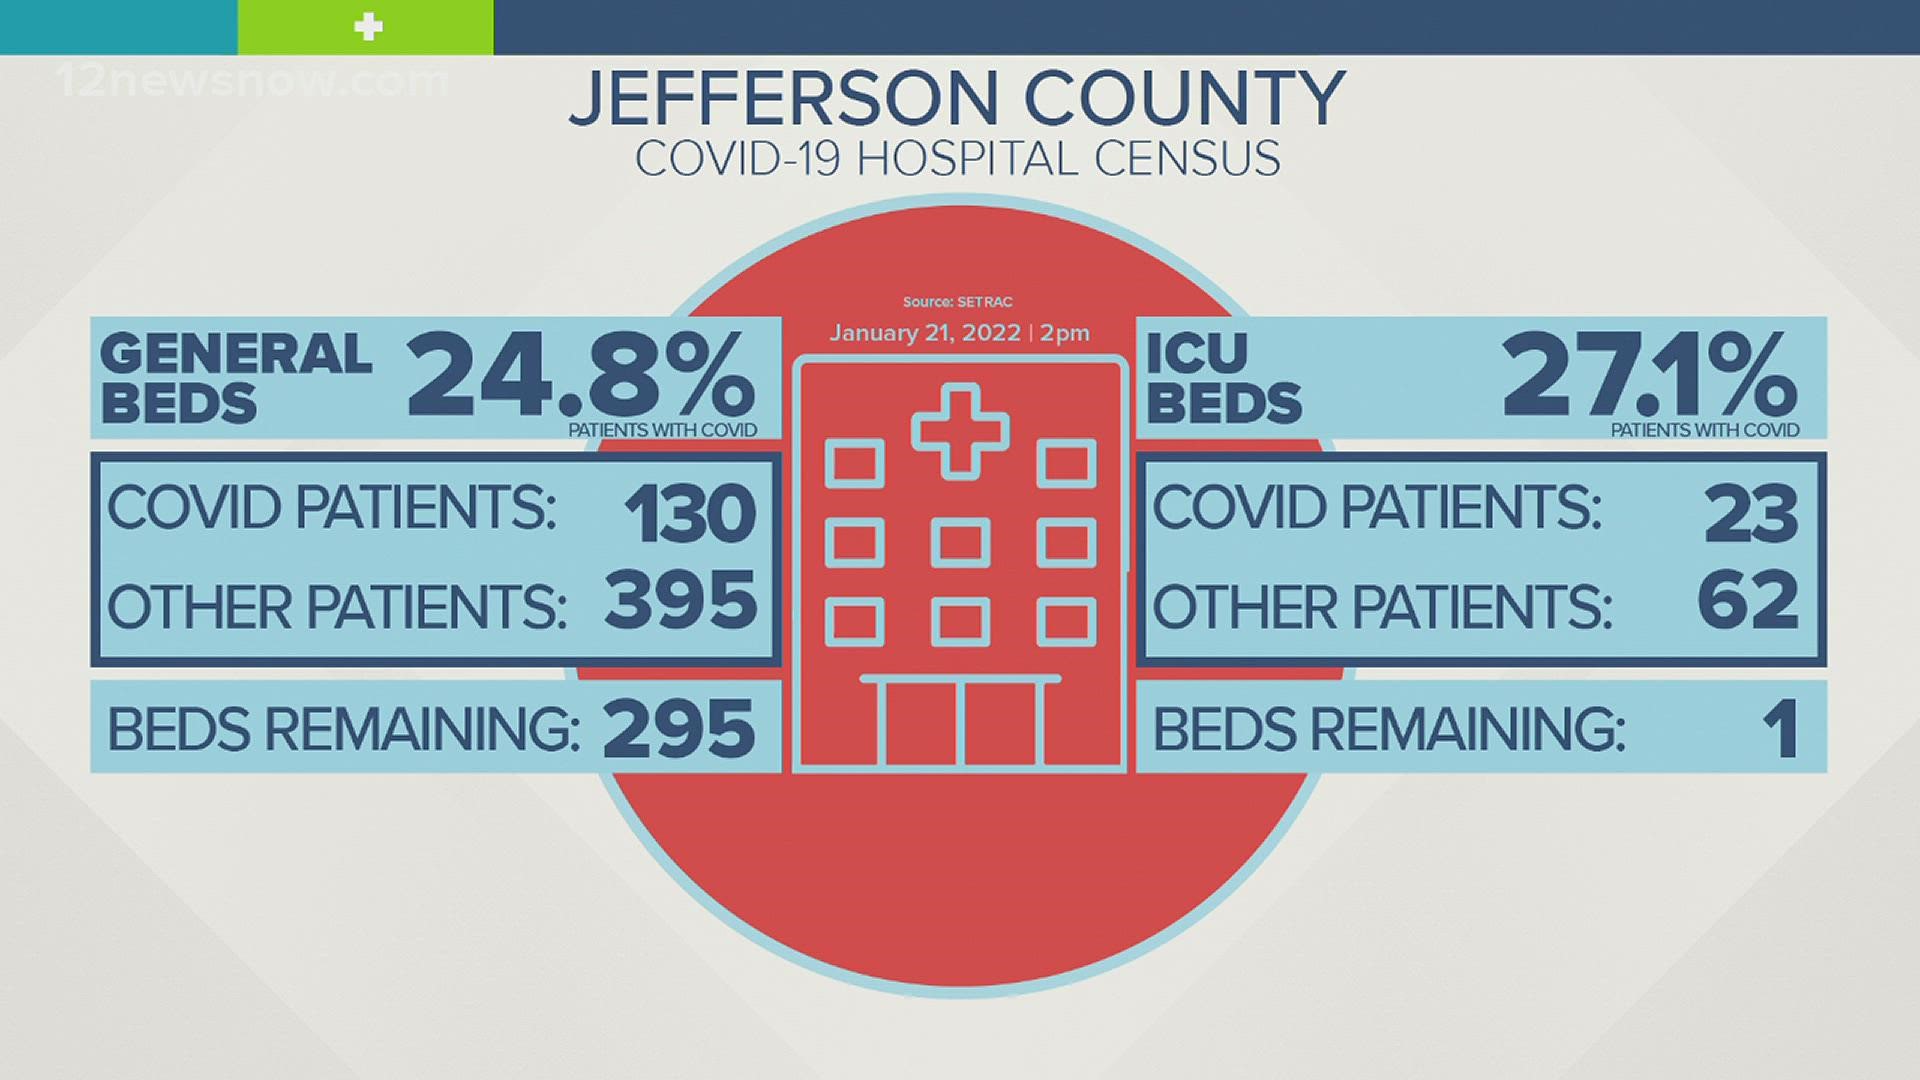 153 COVID-19 patients are hospitalized in Jefferson County, according to state data.